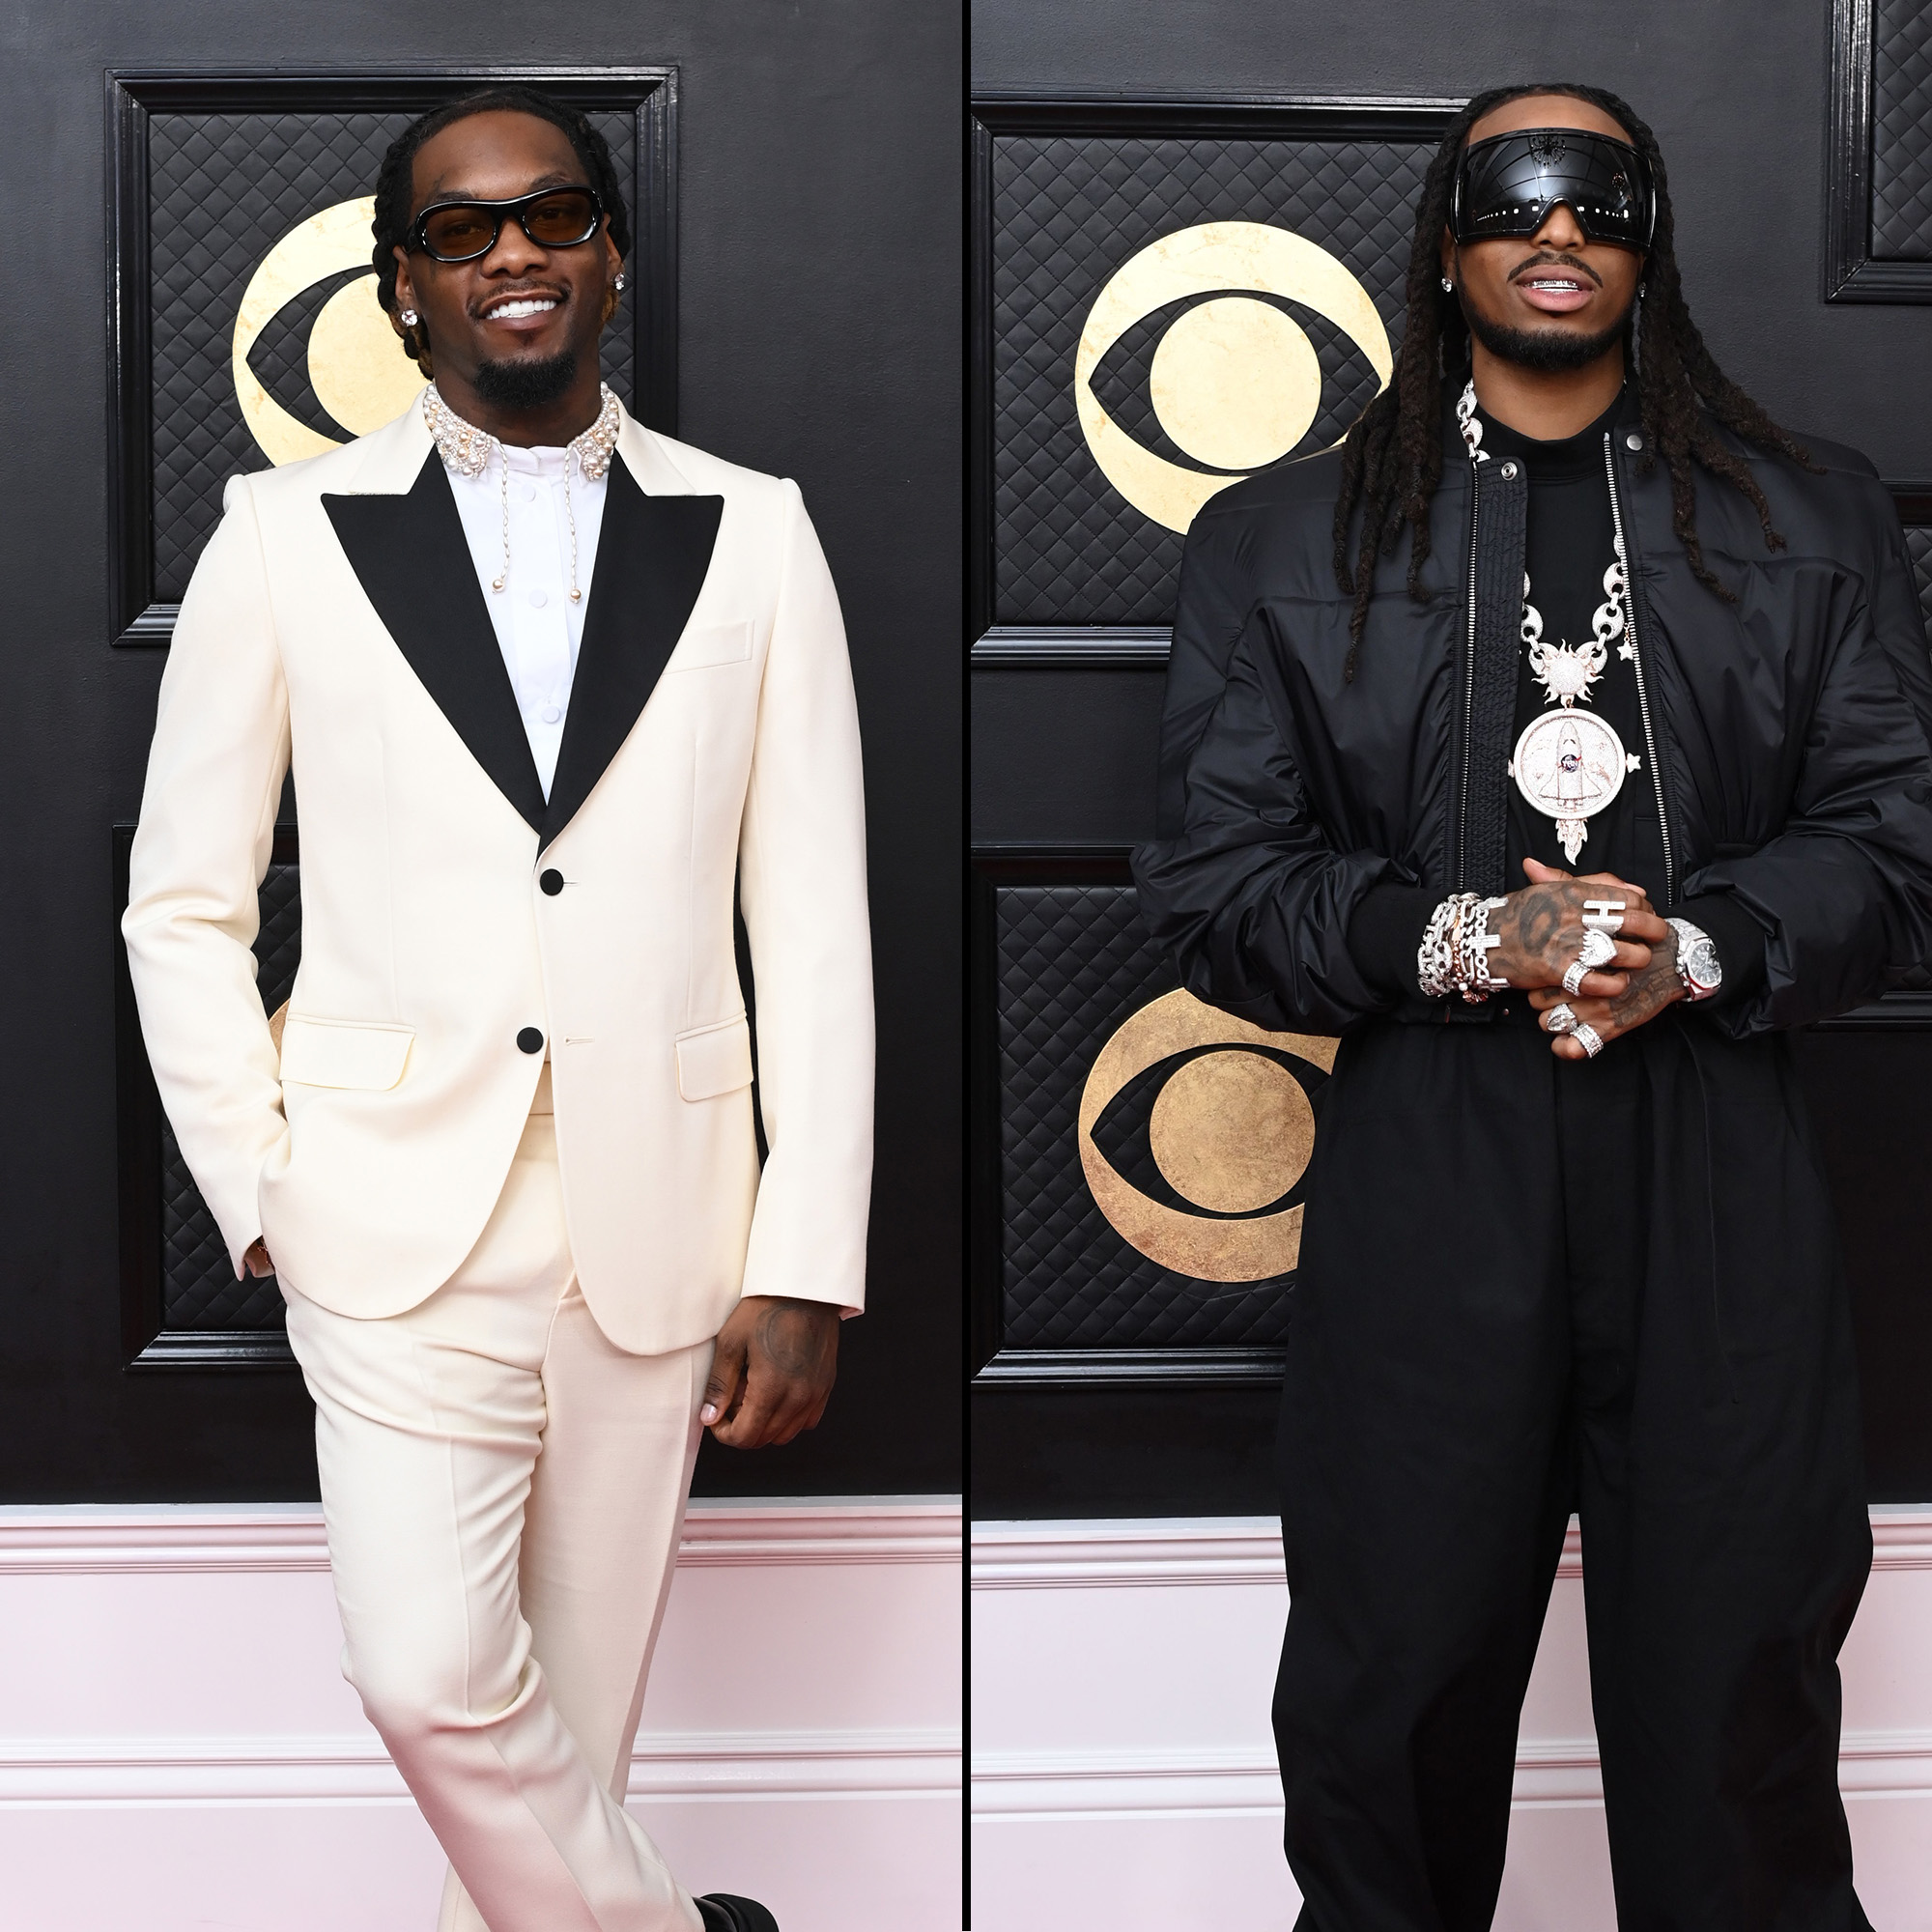 Quavo and Offset Reportedly Got Into Fight Backstage at Grammys